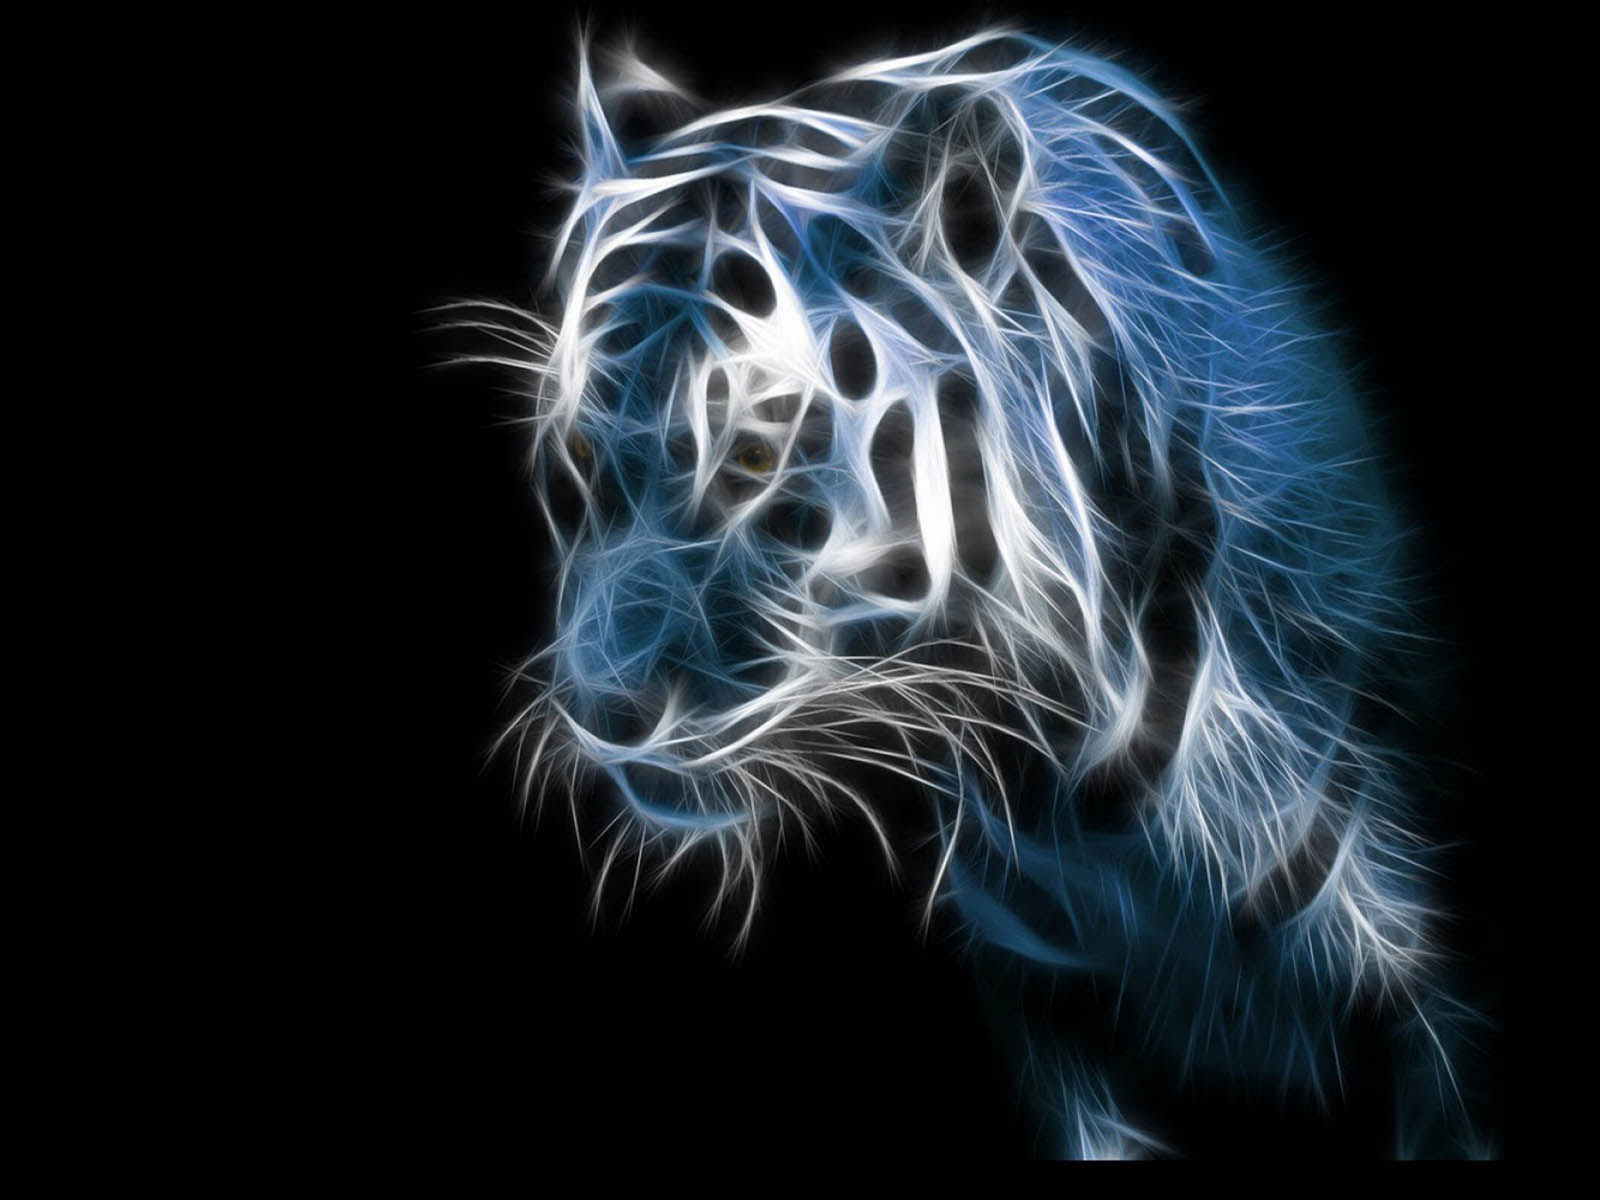  wallpapers  Tiger  3D  Wallpapers 